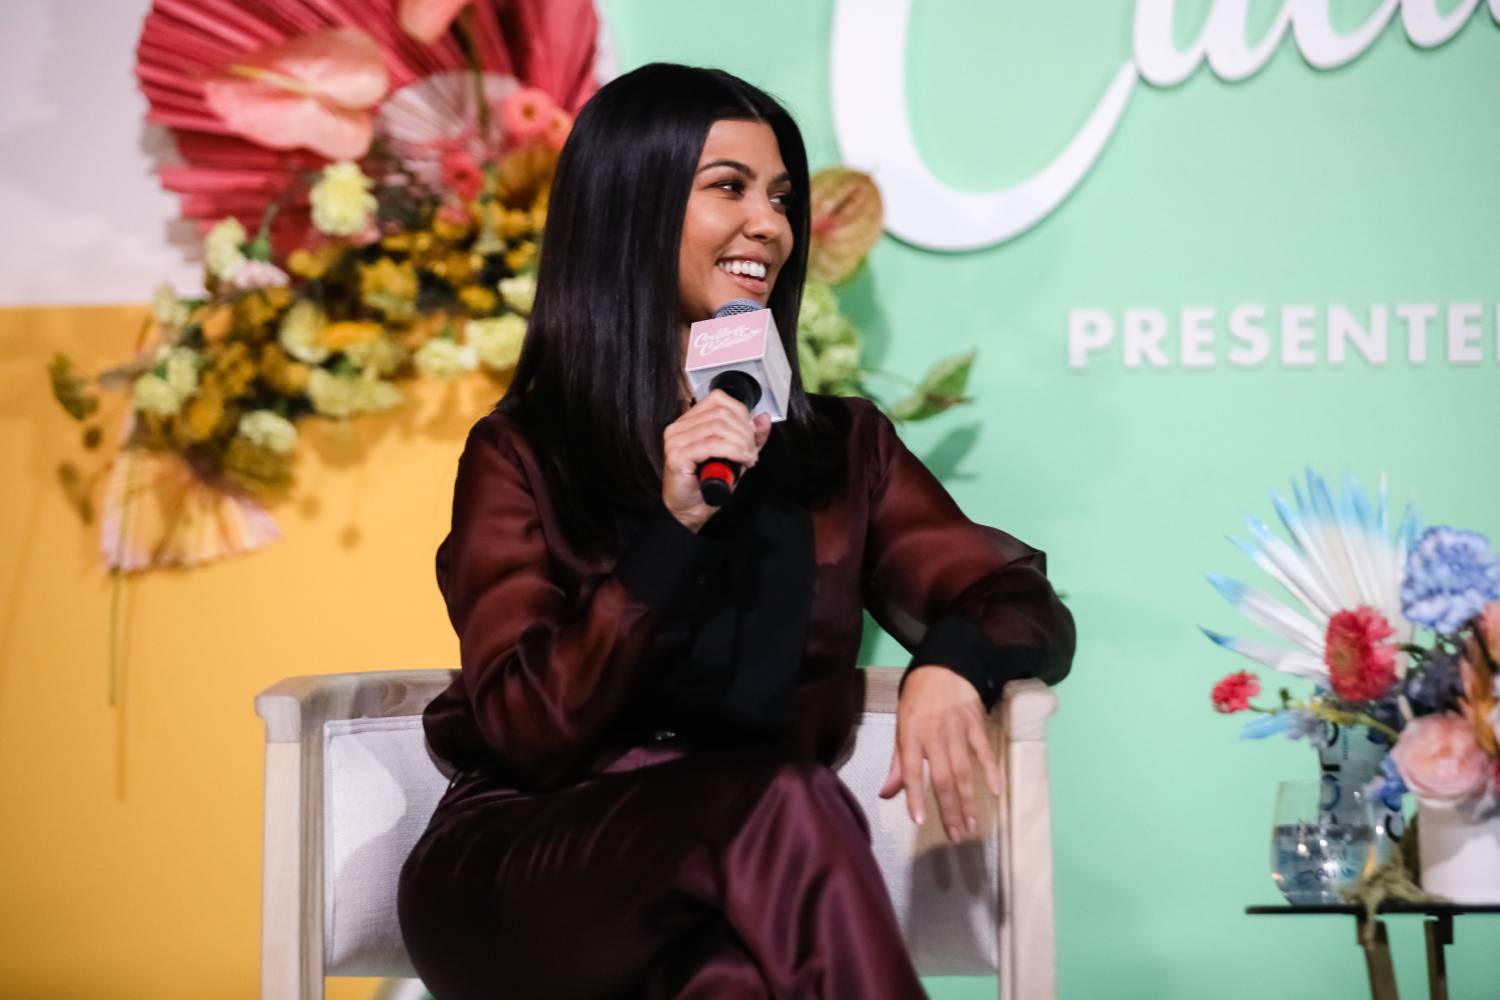 CEO and founder of Poosh, Kourtney Kardashian speaks onstage the Create & Cultivate Conference at SVN West on September 21, 2019 in San Francisco, California.